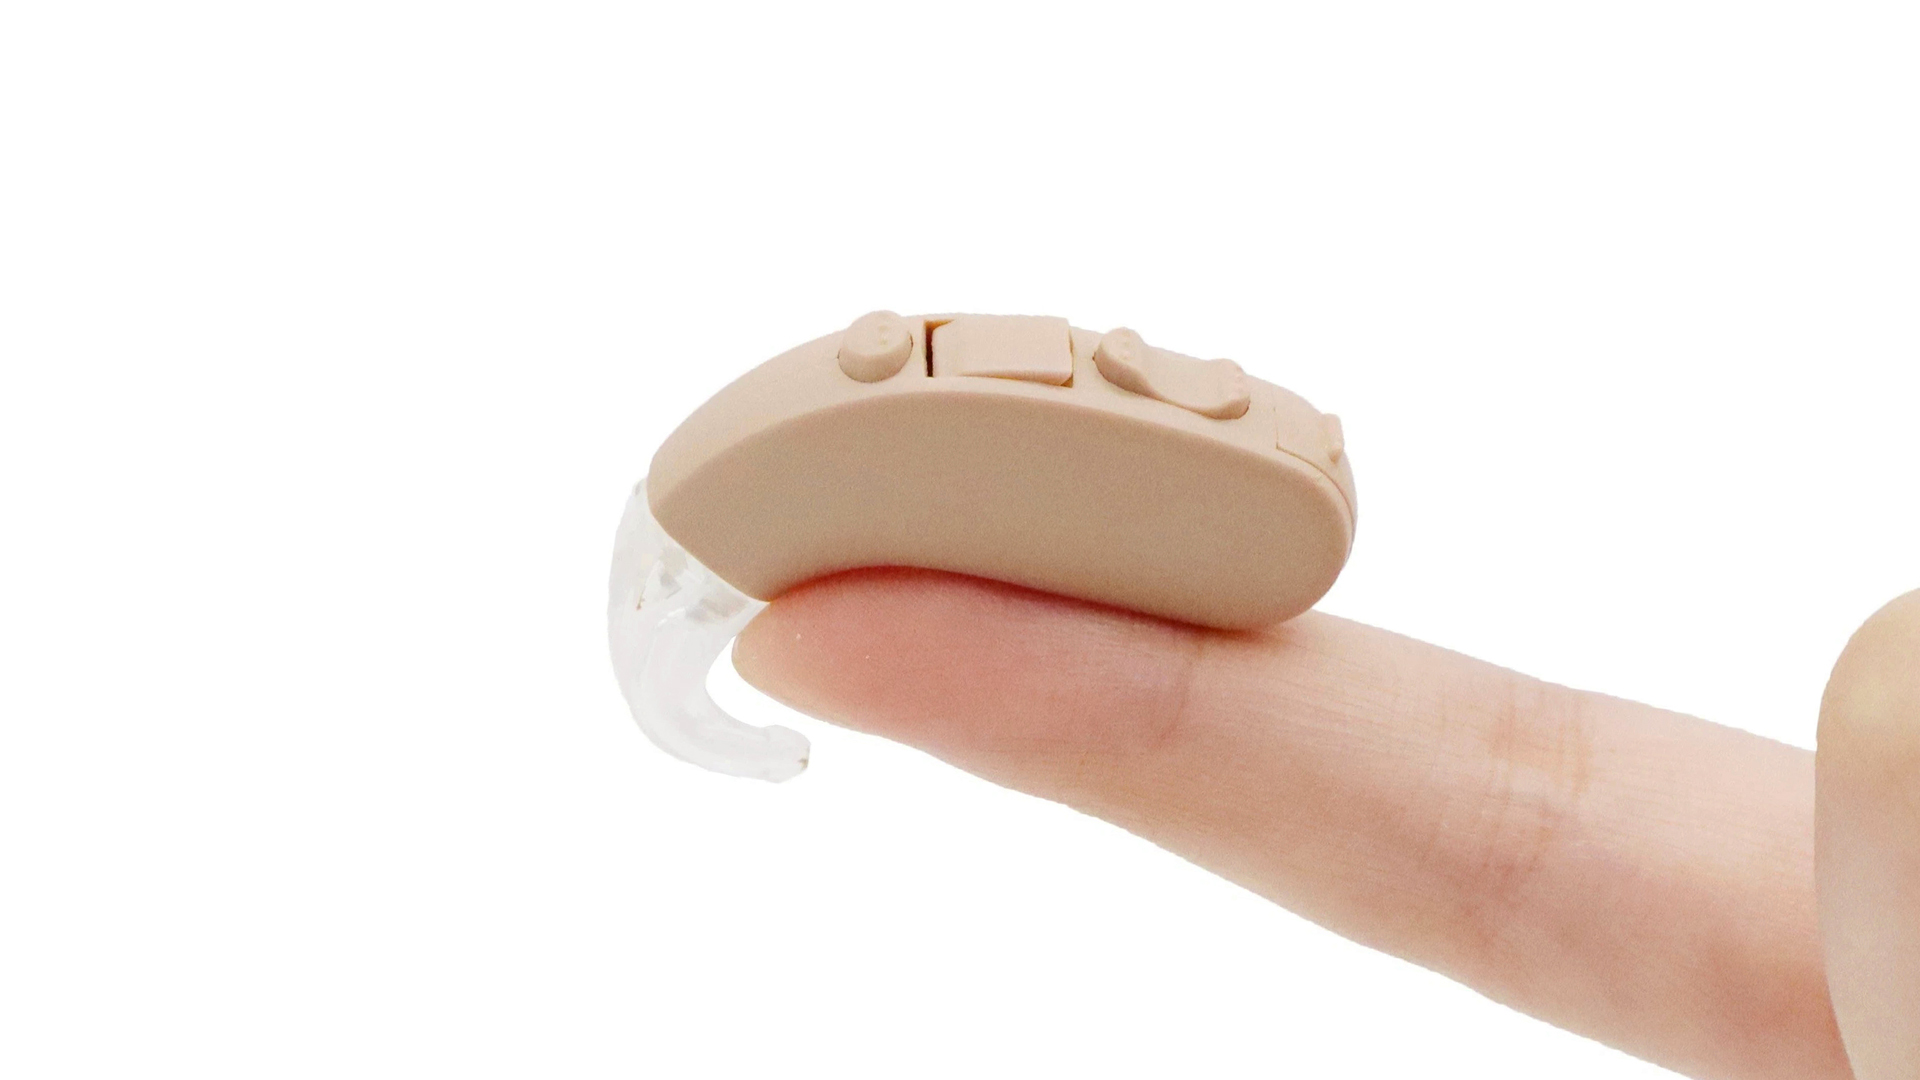 Best and Affordable Programmable Hearing Aids for Severe Hearing Loss Earsmate G26 Pro